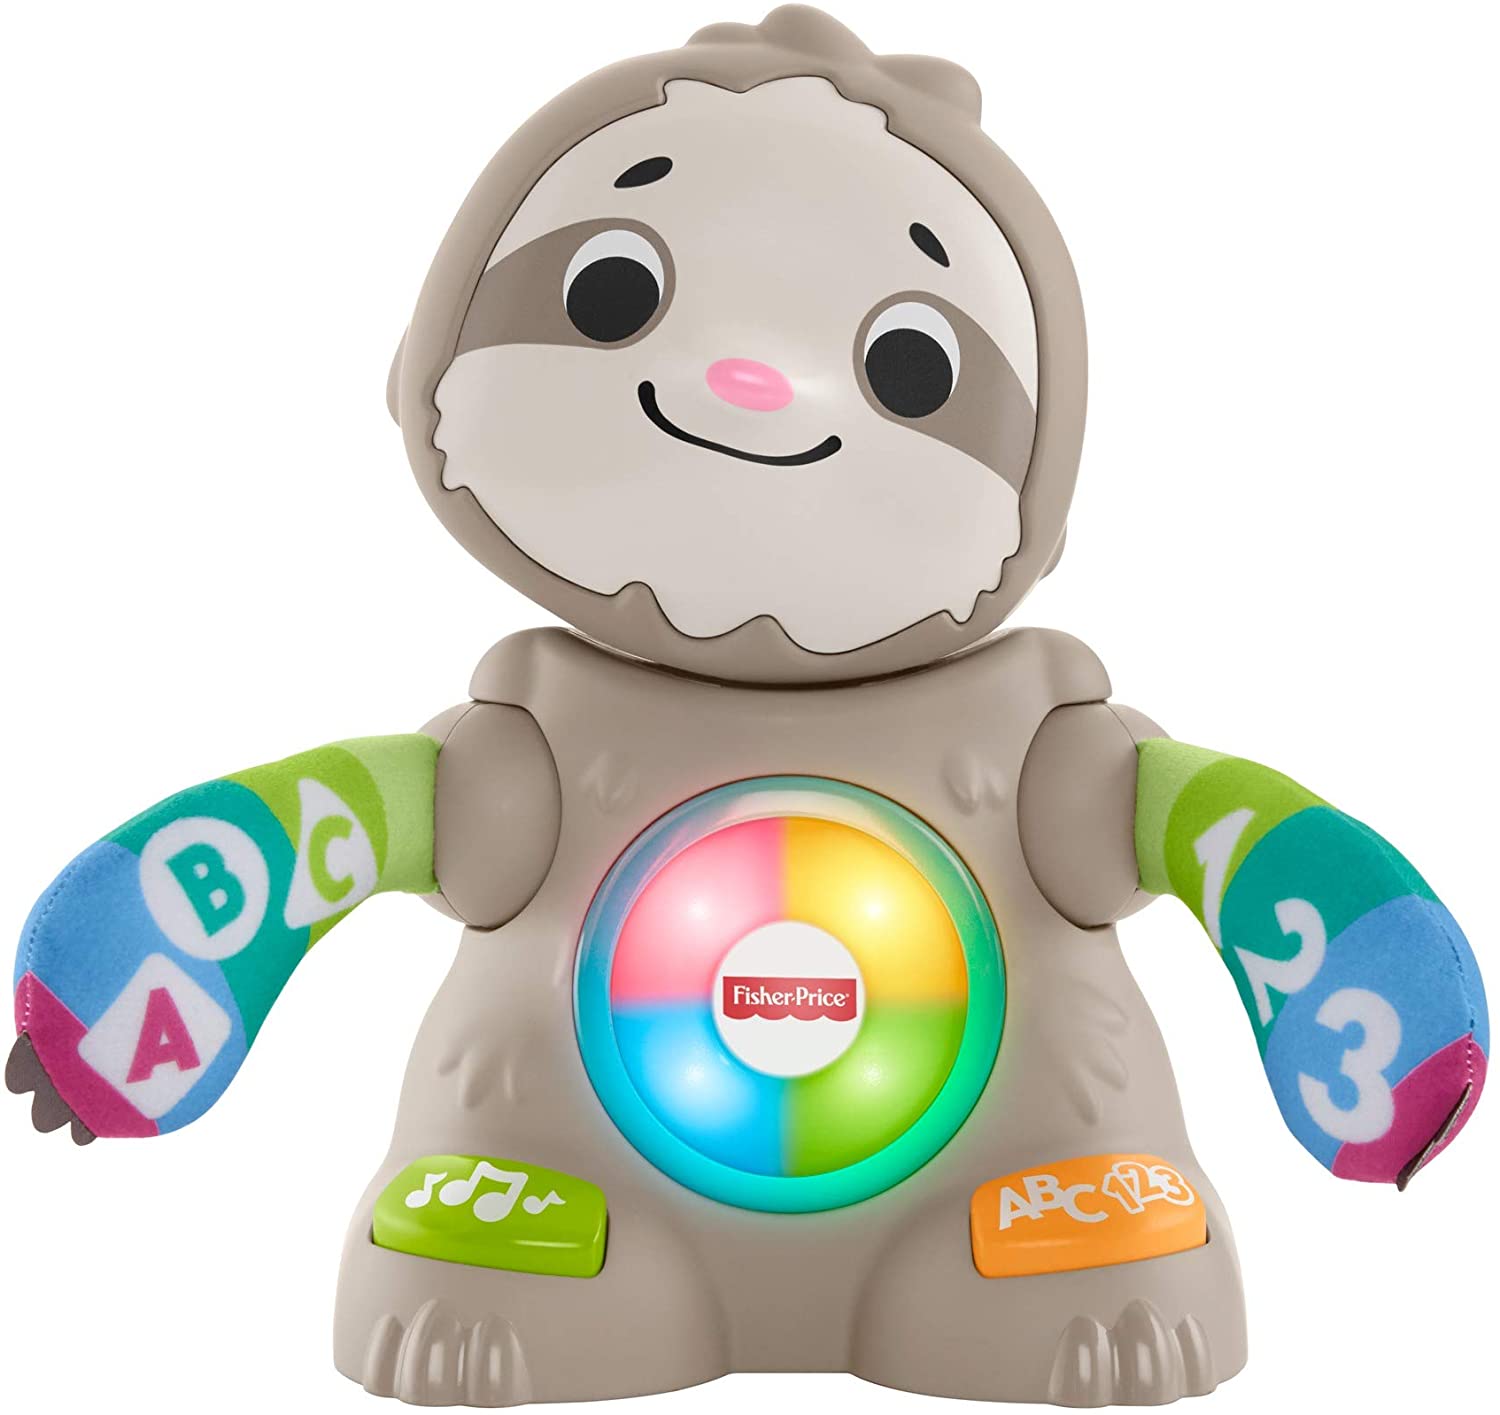 Fisher-Price GHR18 Linkimals Smooth Moves Sloth Toy with Music and Lights, Multi-Colour